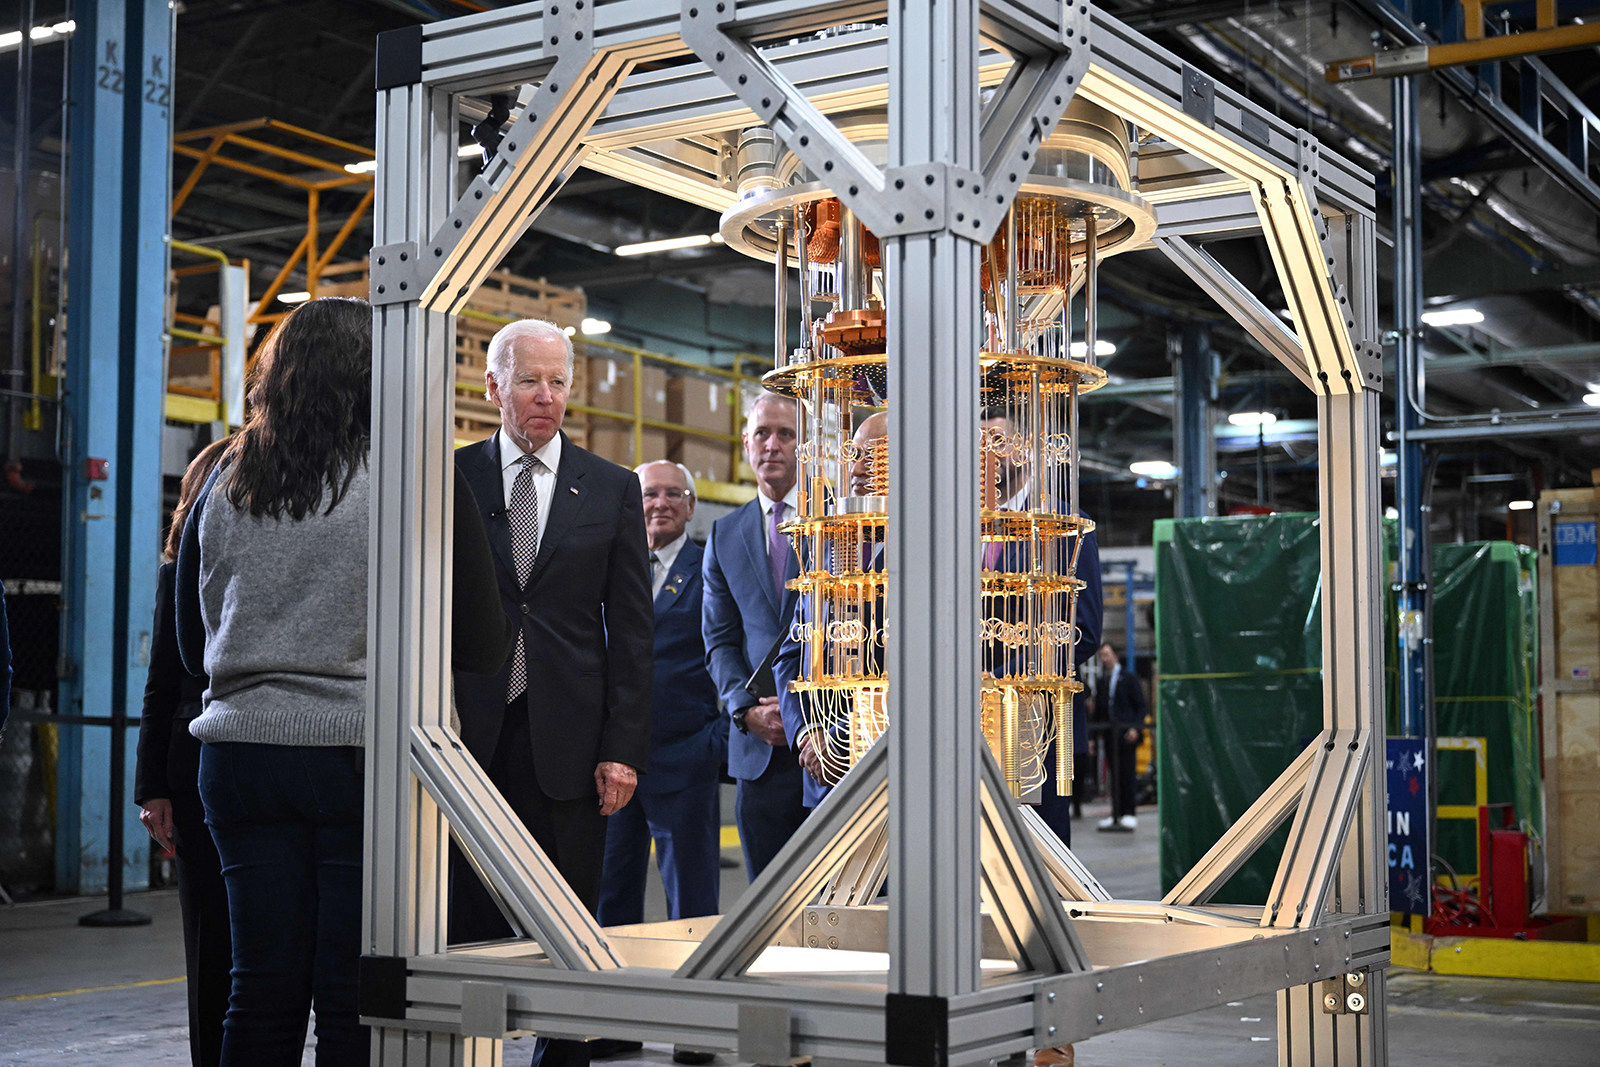 US President Joe Biden looks at a quantum computer at an IBM facility in Poughkeepsie, New York in 2022. The Biden administration has sought to restrict China’s access to advanced technologies. Photo: AFP via Getty Images/TNS